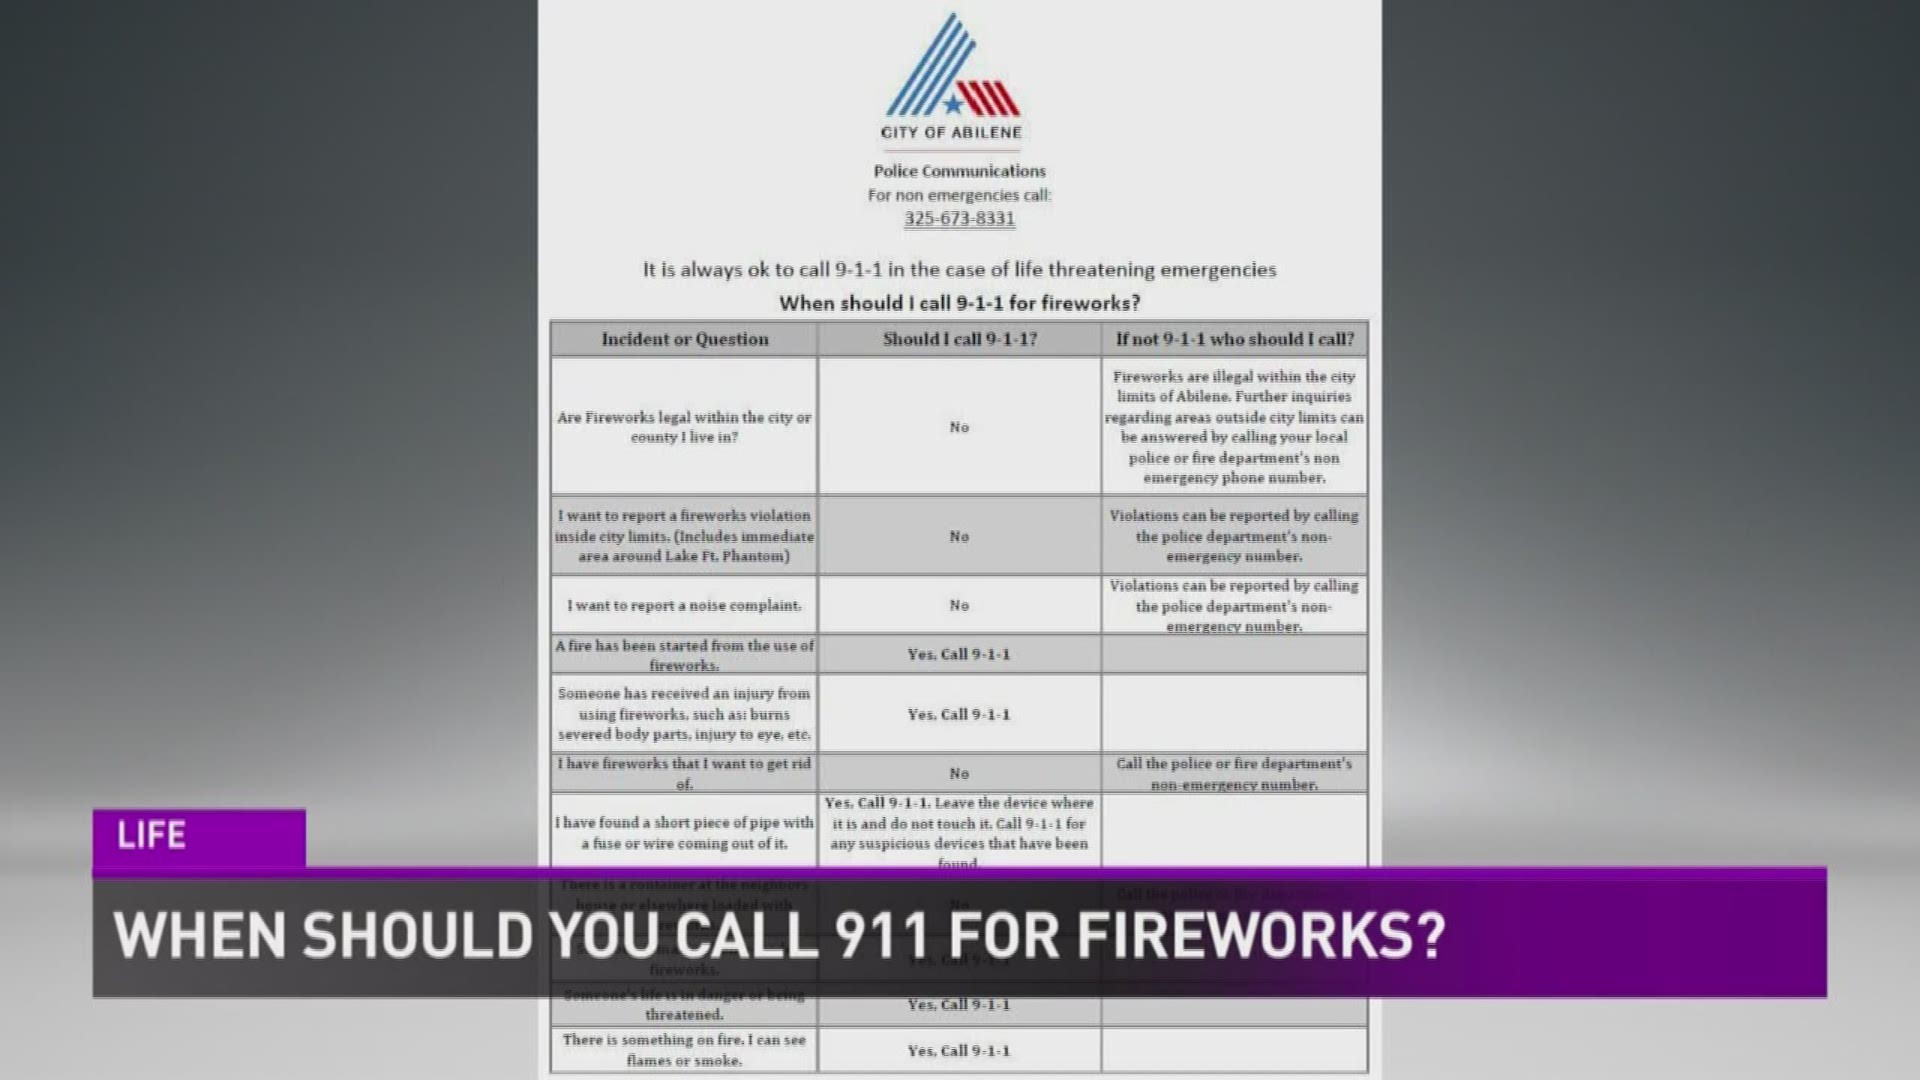 City officials remind residents that fireworks are not permitted within the city or in Taylor County.